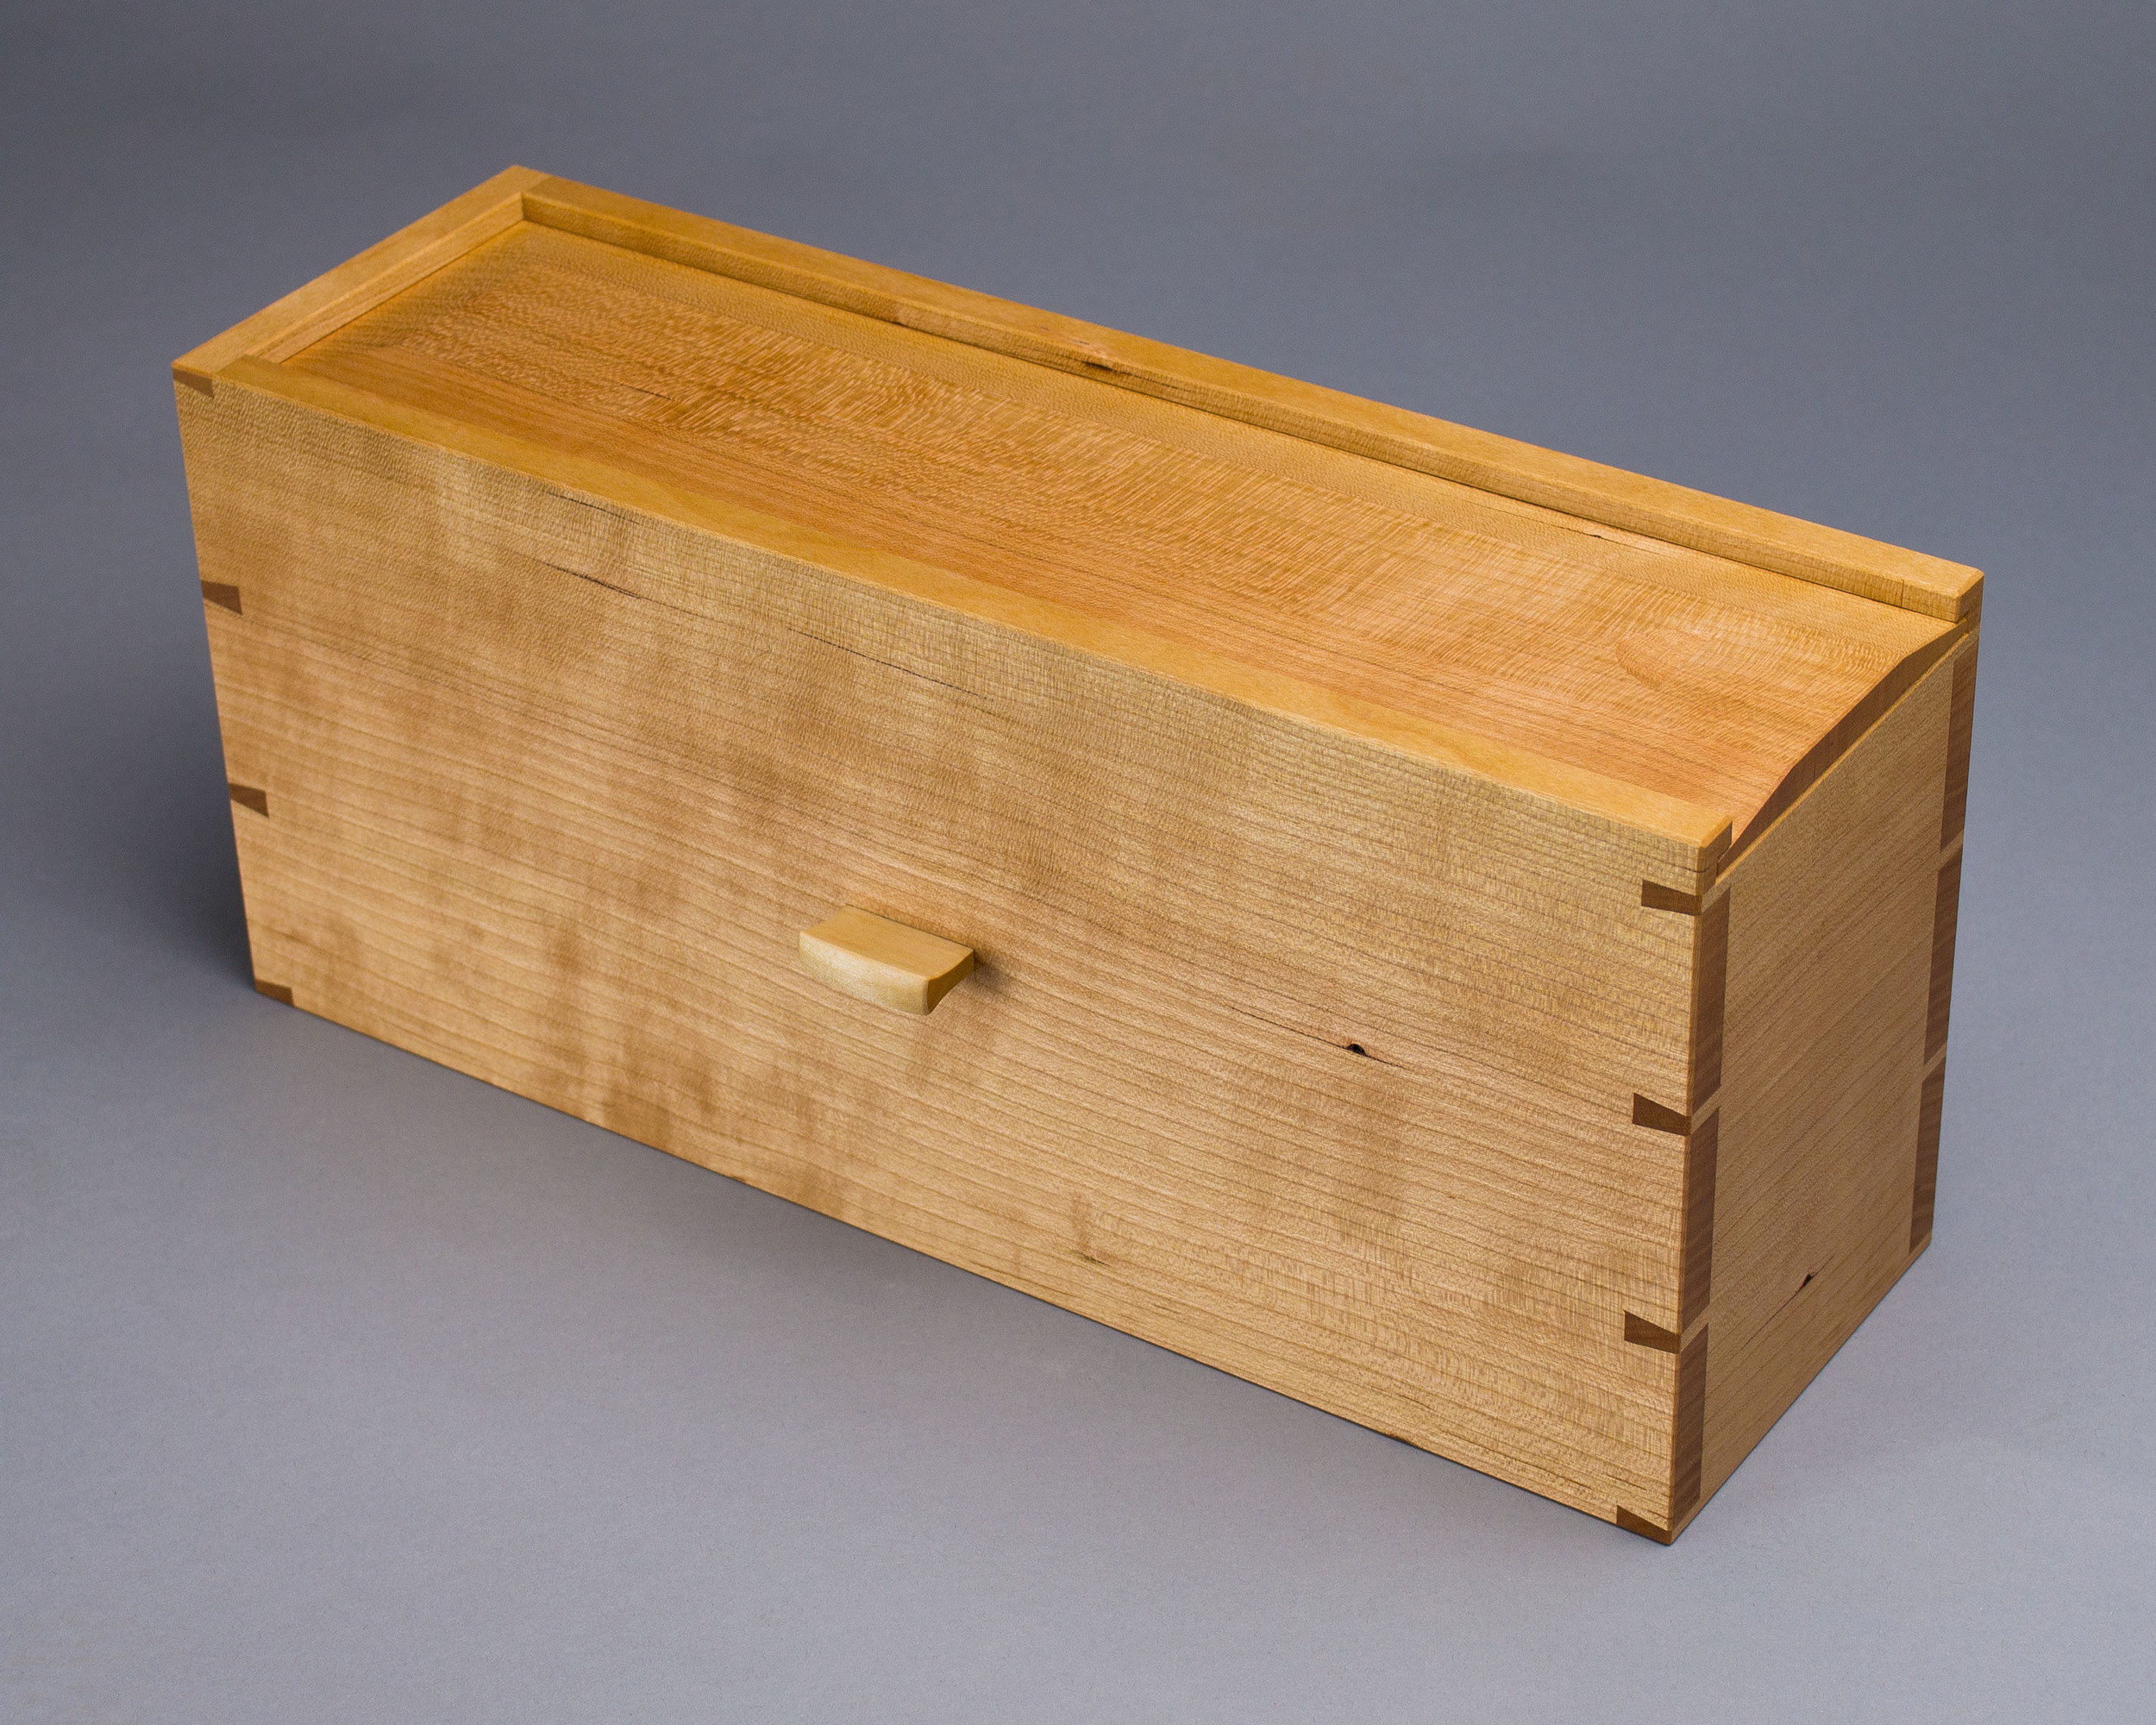  The hidden compartment, a dovetailed box made of quartersawn cherry. 